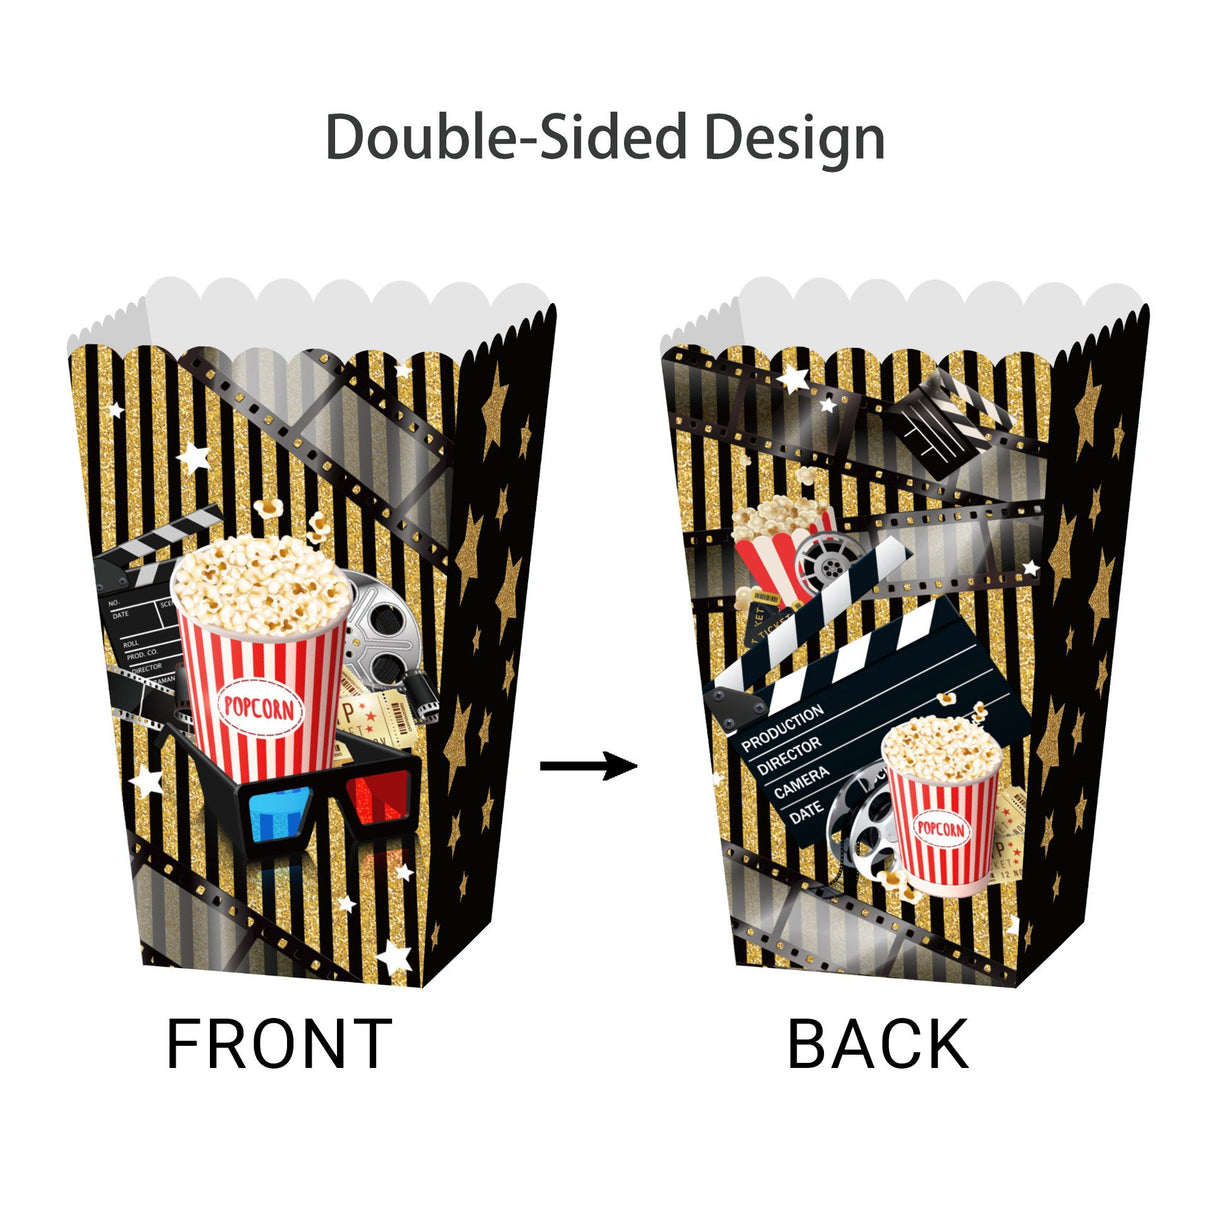 Convenient and Durable Popcorn Box Set for Movie Nights